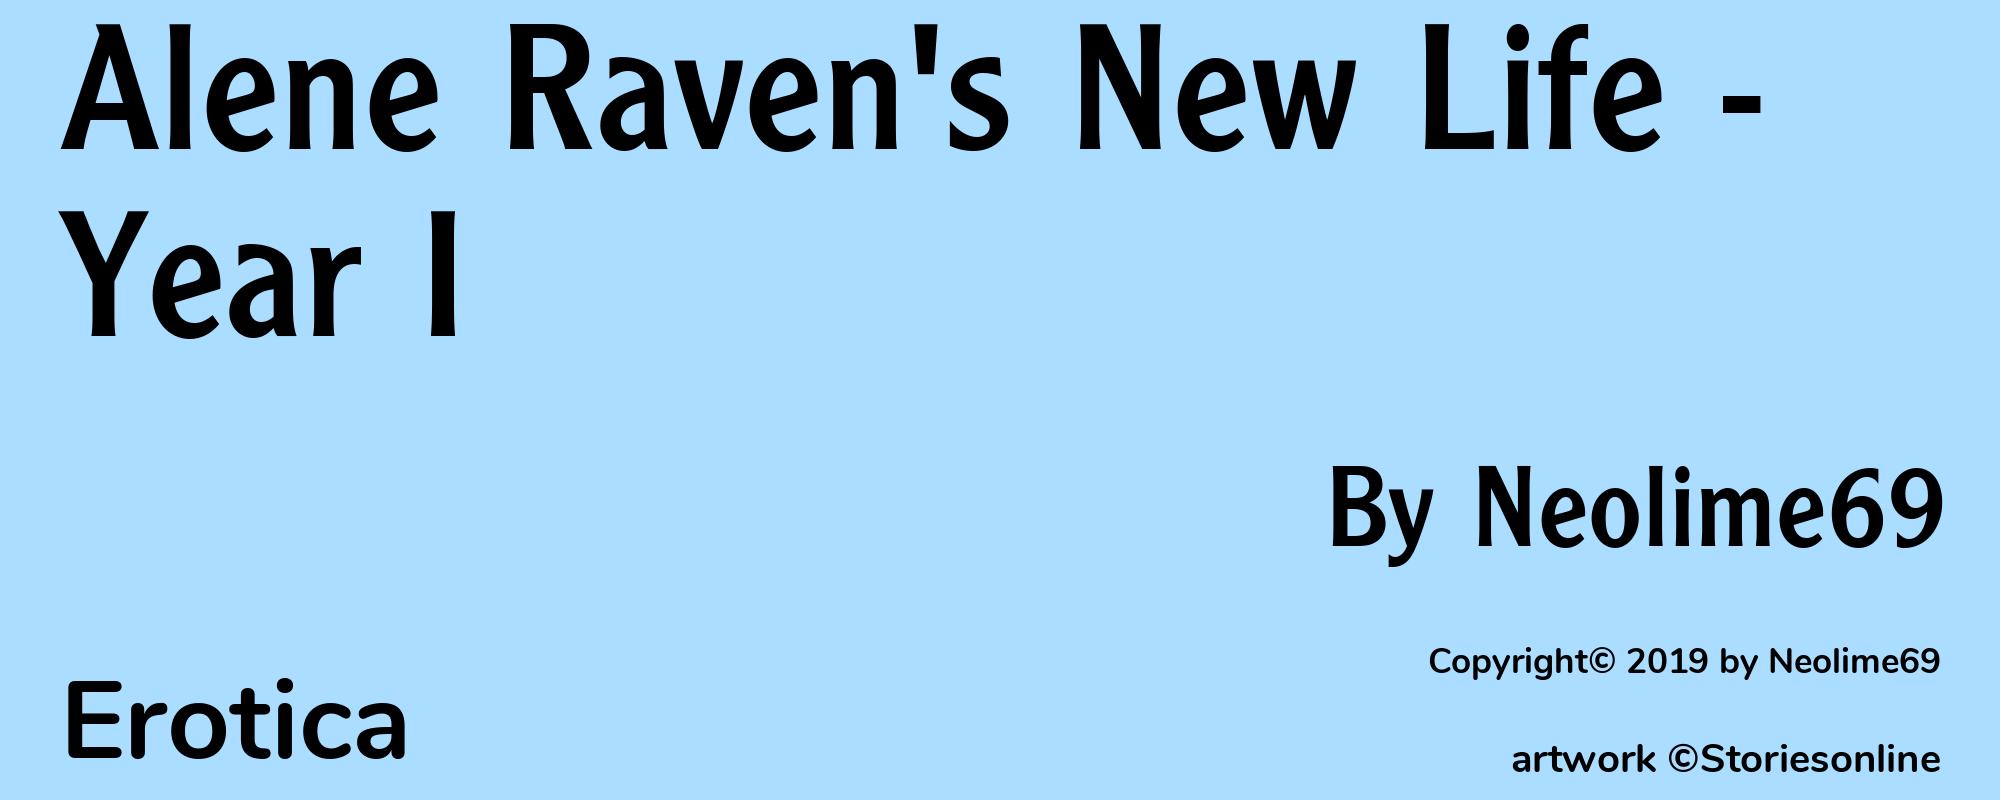 Alene Raven's New Life - Year I - Cover